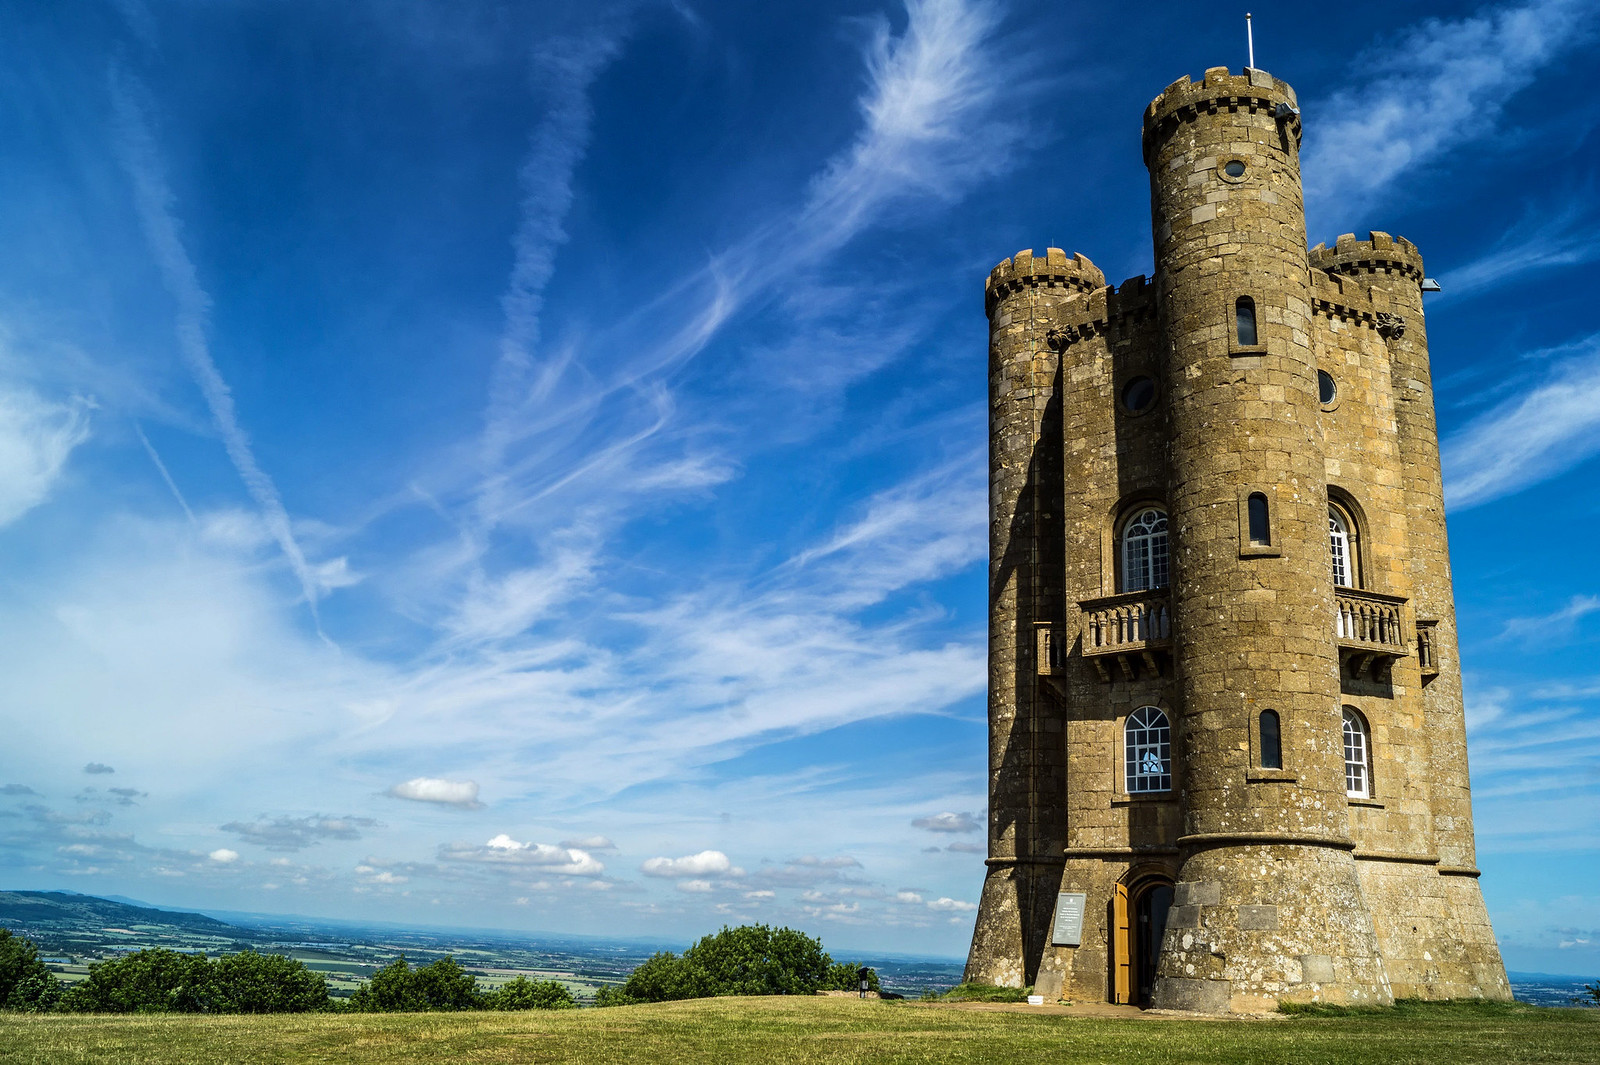 Broadway Tower. Credit Phil Dolby